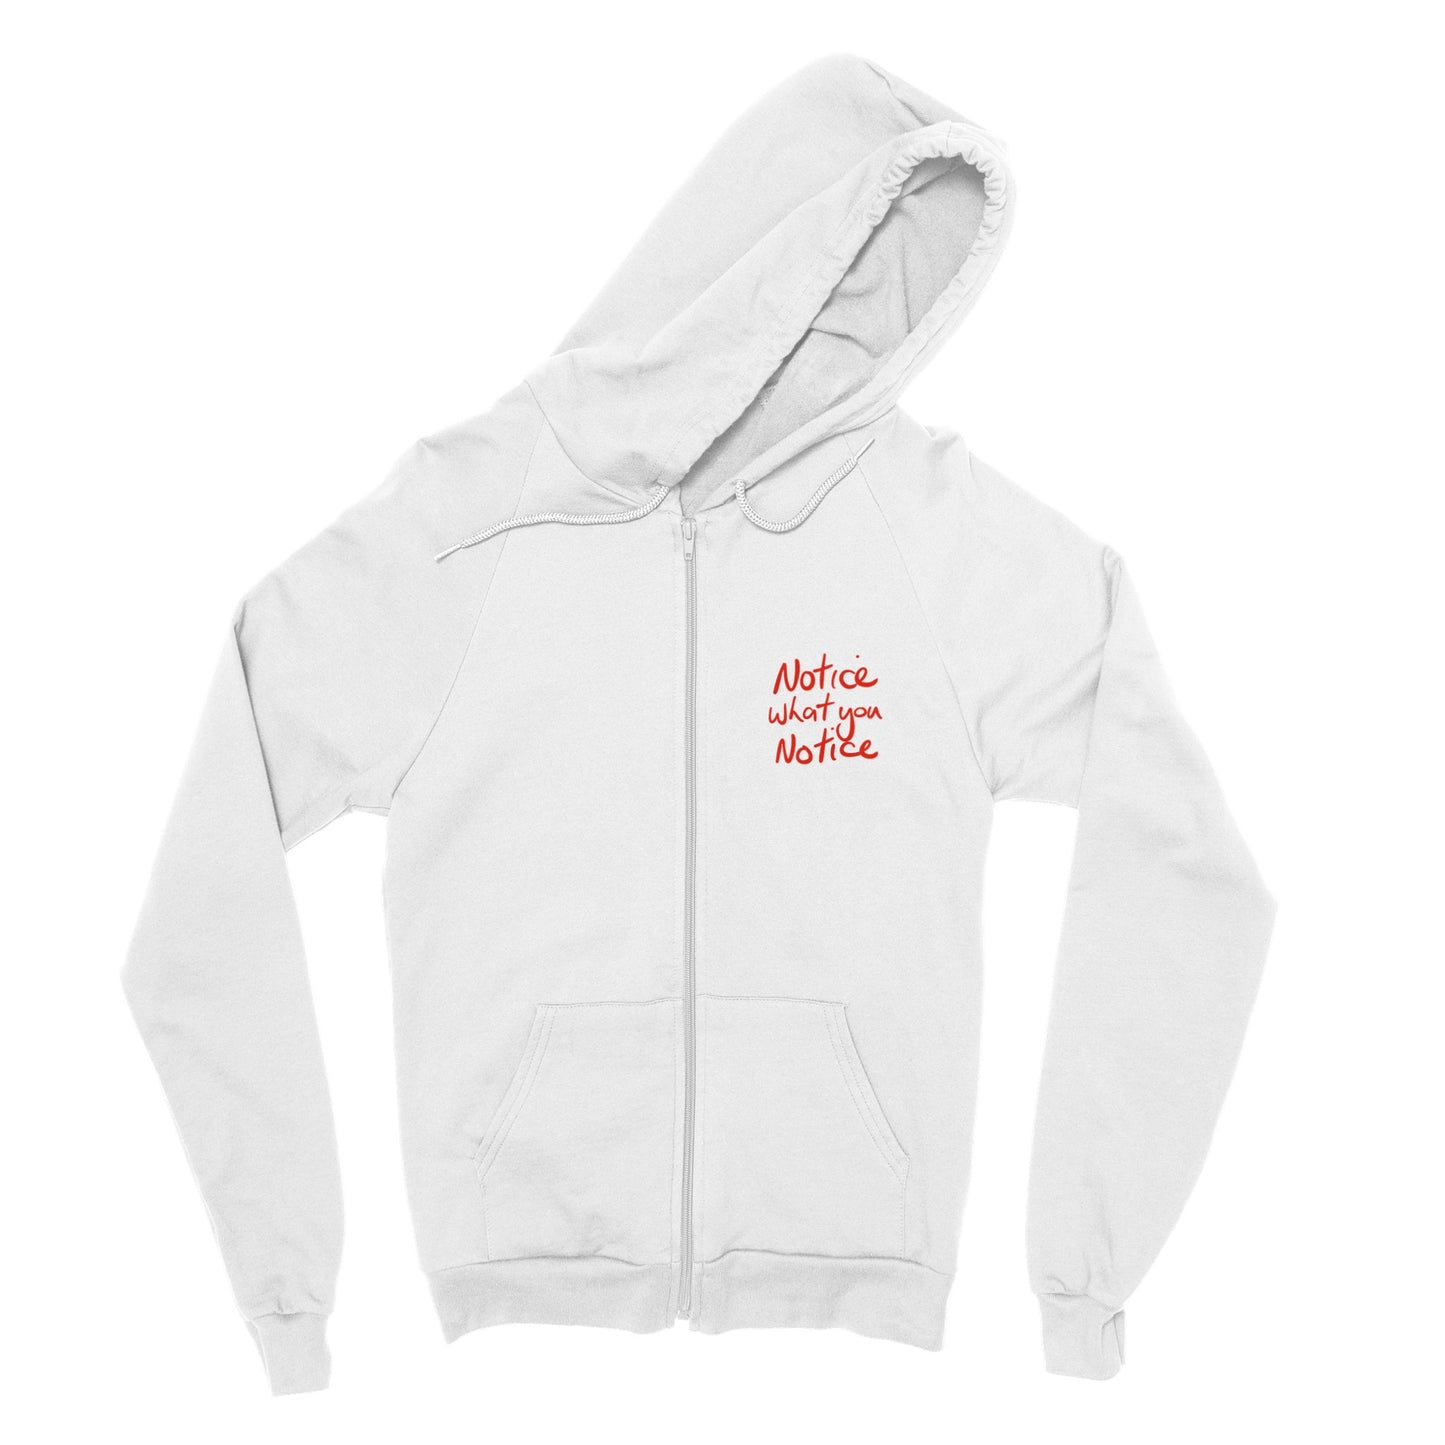 'Notice what you notice' Pocket print red on white Classic Unisex Zip Hoodie. Free Shipping.